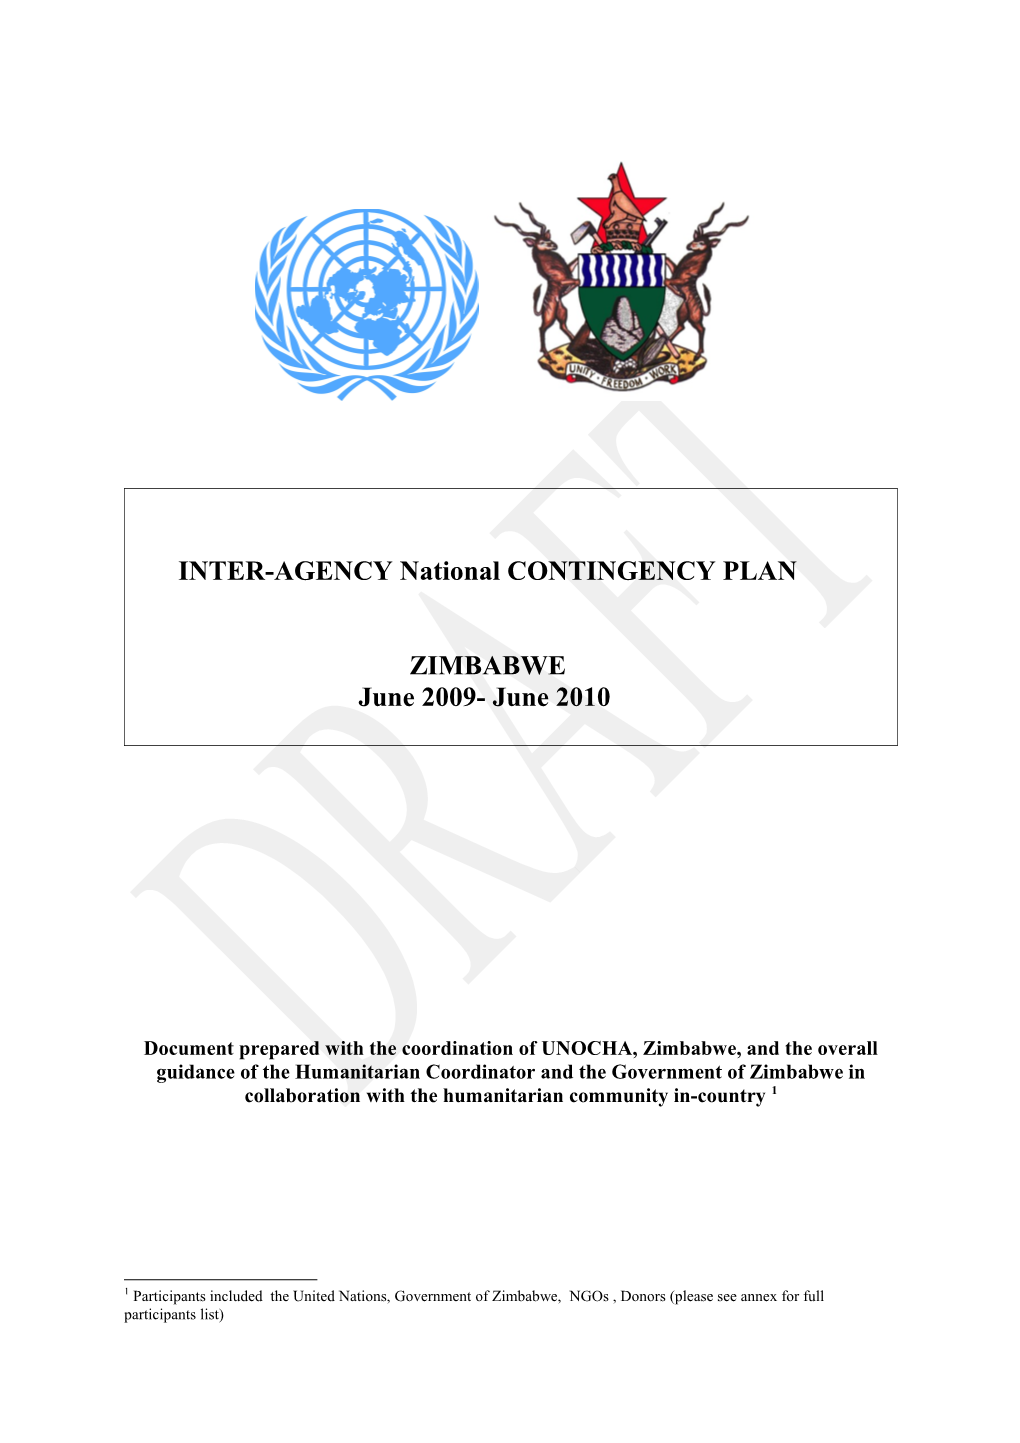 INTER-AGENCY National CONTINGENCY PLAN